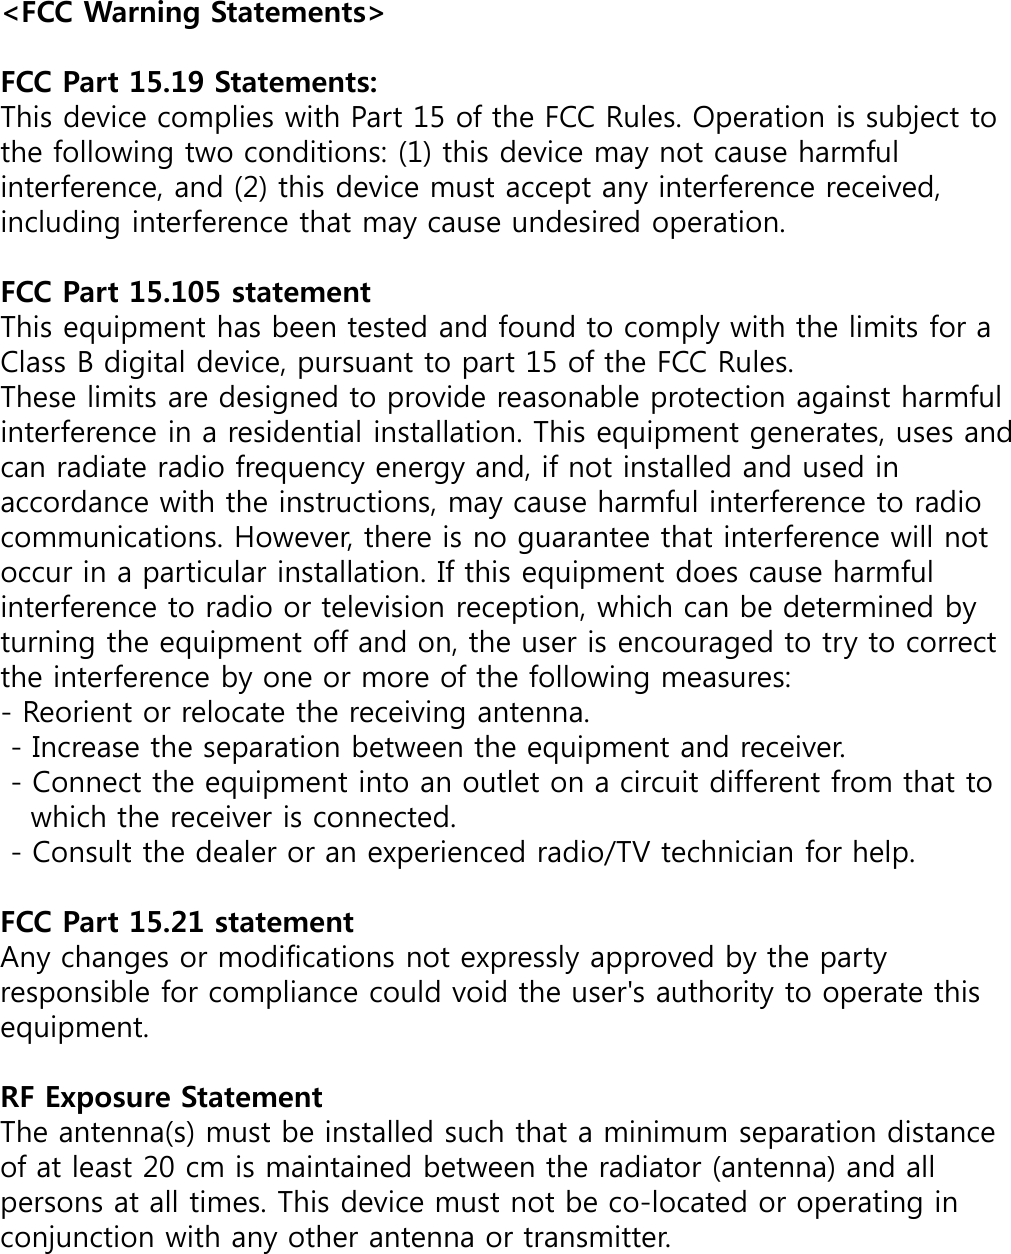 &lt;FCC Warning Statements&gt;FCC Part 15.19 Statements: This device complies with Part 15 of the FCC Rules. Operation is subject to the following two conditions: (1) this device may not cause harmful interference, and (2) this device must accept any interference received, including interference that may cause undesired operation.FCC Part 15.105 statementThis equipment has been tested and found to comply with the limits for a Class B digital device, pursuant to part 15 of the FCC Rules. These limits are designed to provide reasonable protection against harmful interference in a residential installation. This equipment generates, uses and can radiate radio frequency energy and, if not installed and used in accordance with the instructions, may cause harmful interference to radio communications. However, there is no guarantee that interference will not occur in a particular installation. If this equipment does cause harmful interference to radio or television reception, which can be determined by turning the equipment off and on, the user is encouraged to try to correct the interference by one or more of the following measures:- Reorient or relocate the receiving antenna. - Increase the separation between the equipment and receiver. - Connect the equipment into an outlet on a circuit different from that to which the receiver is connected. - Consult the dealer or an experienced radio/TV technician for help.FCC Part 15.21 statementAny changes or modifications not expressly approved by the party responsible for compliance could void the user&apos;s authority to operate this equipment.RF Exposure StatementThe antenna(s) must be installed such that a minimum separation distance of at least 20 cm is maintained between the radiator (antenna) and all persons at all times. This device must not be co-located or operating in conjunction with any other antenna or transmitter.